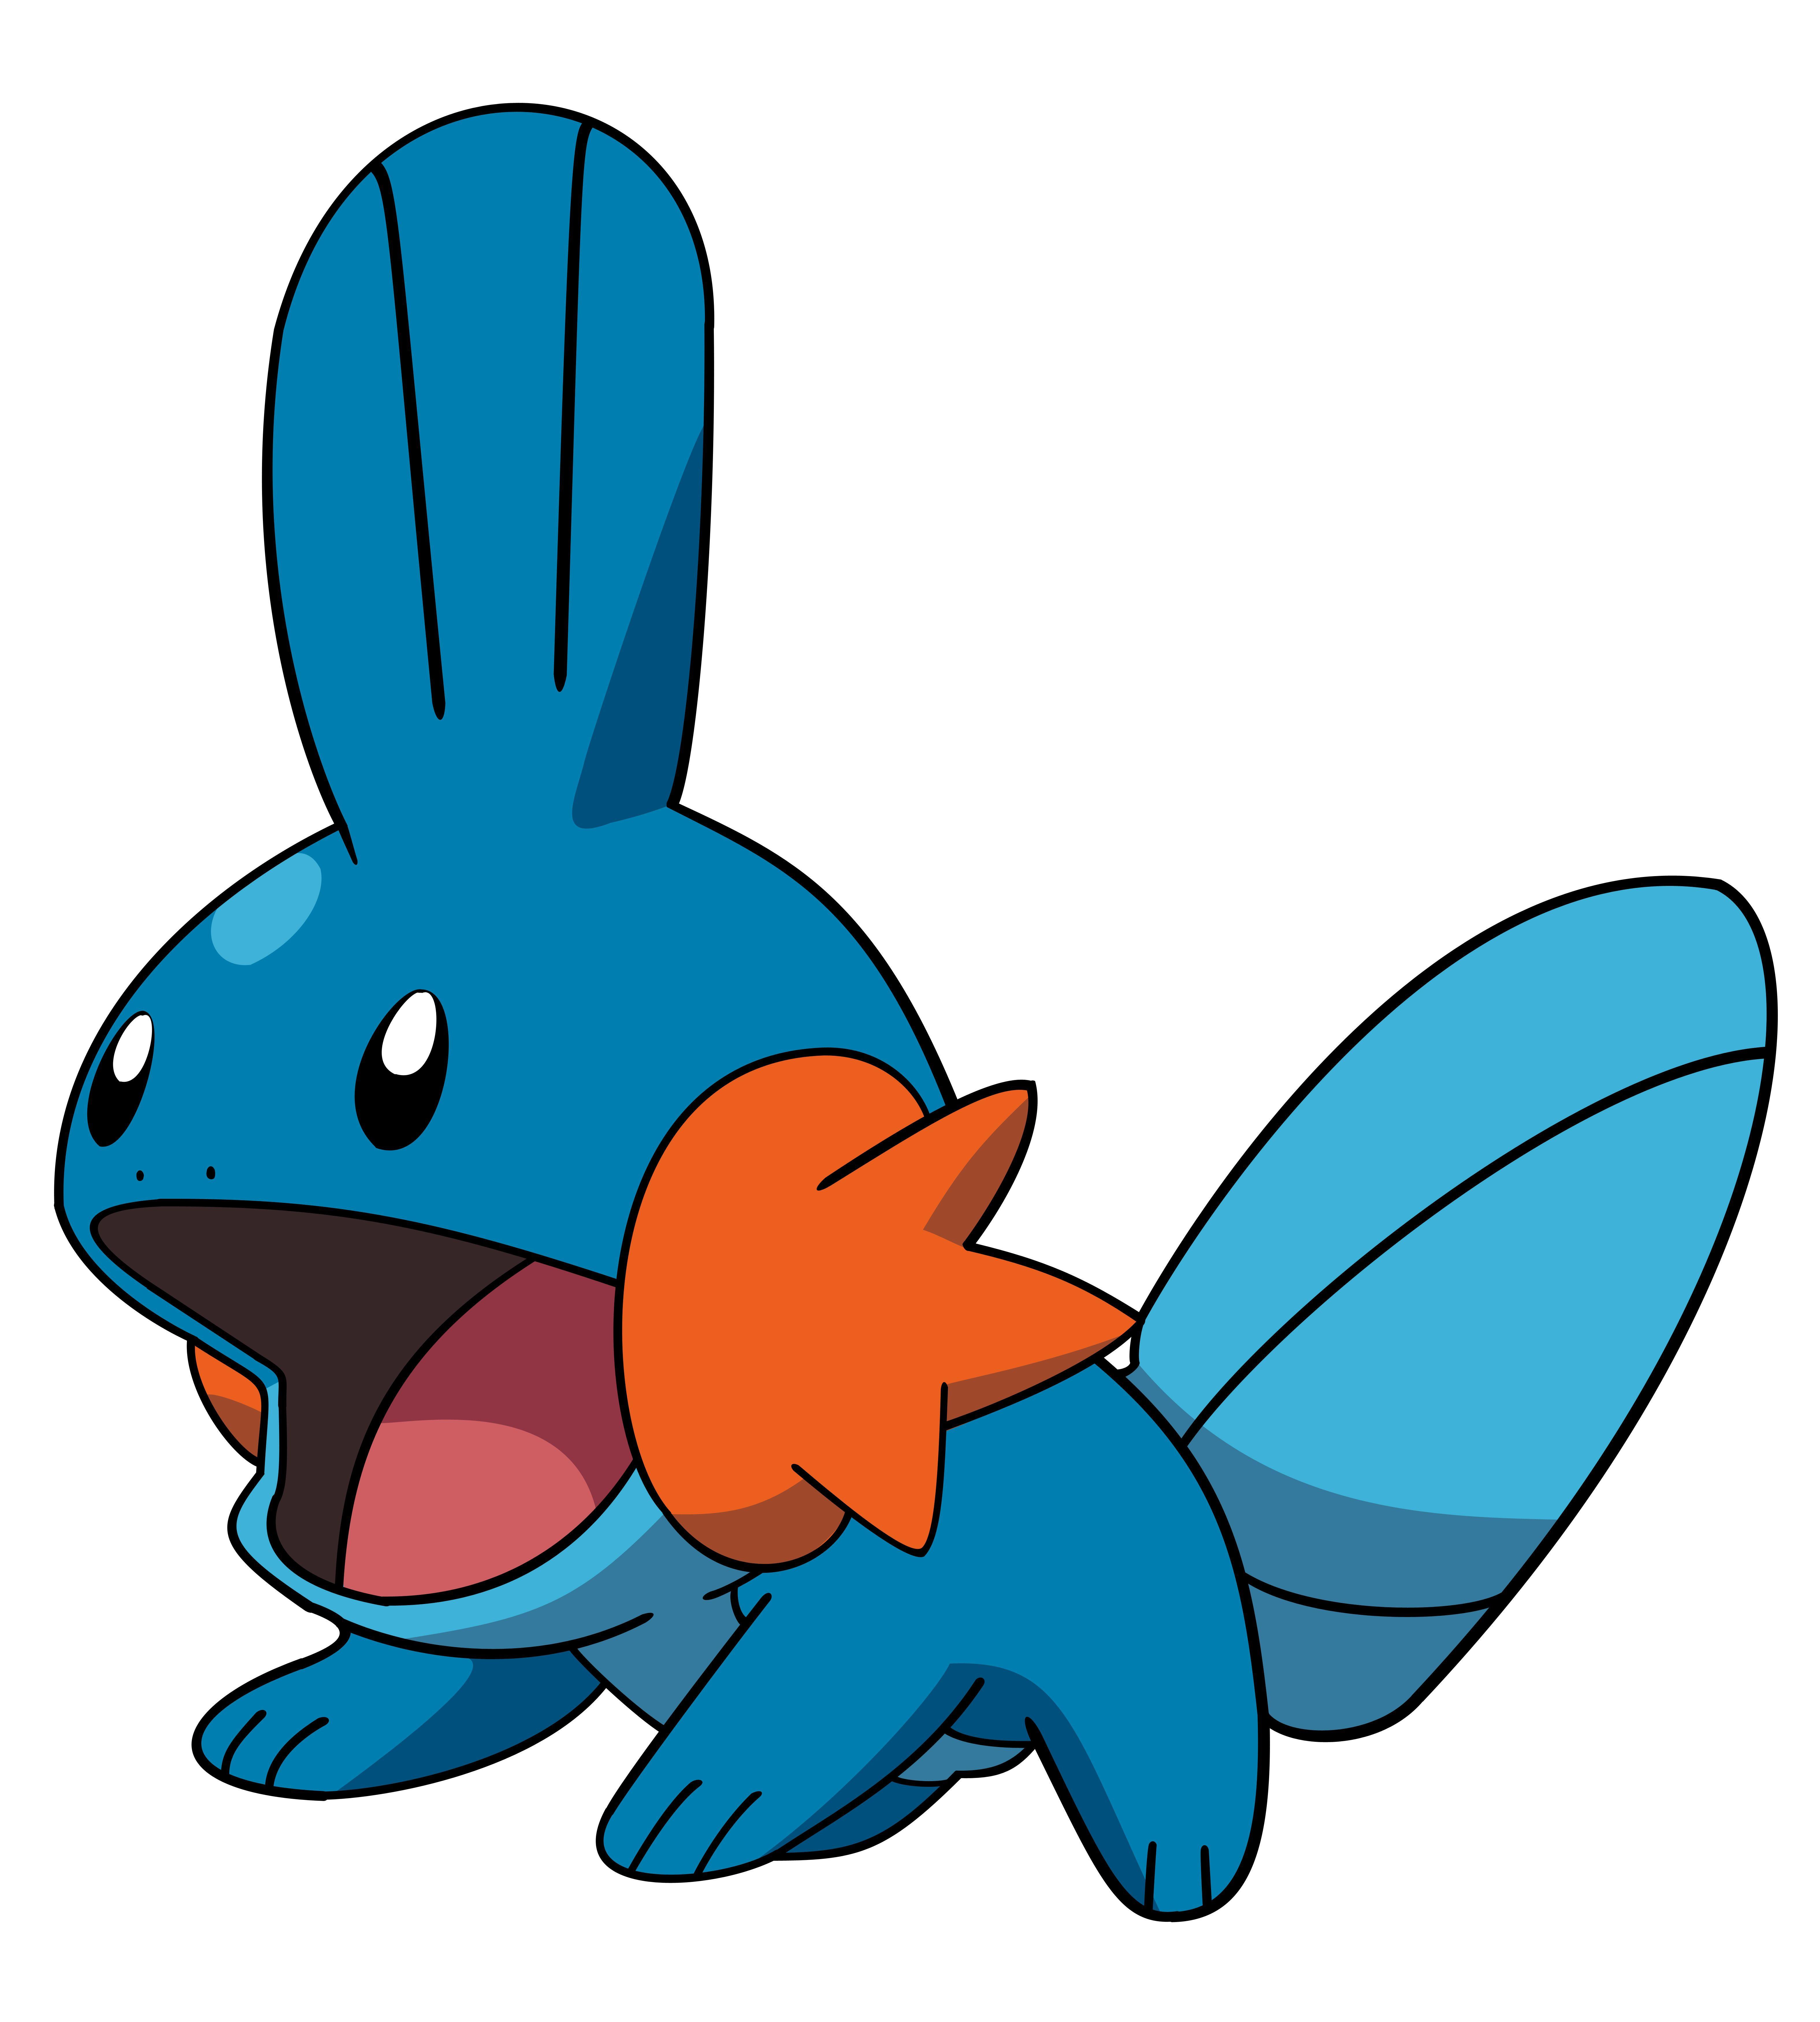 Anime Mudkip 6300x7000px - 100% Quality HD Wallpapers.